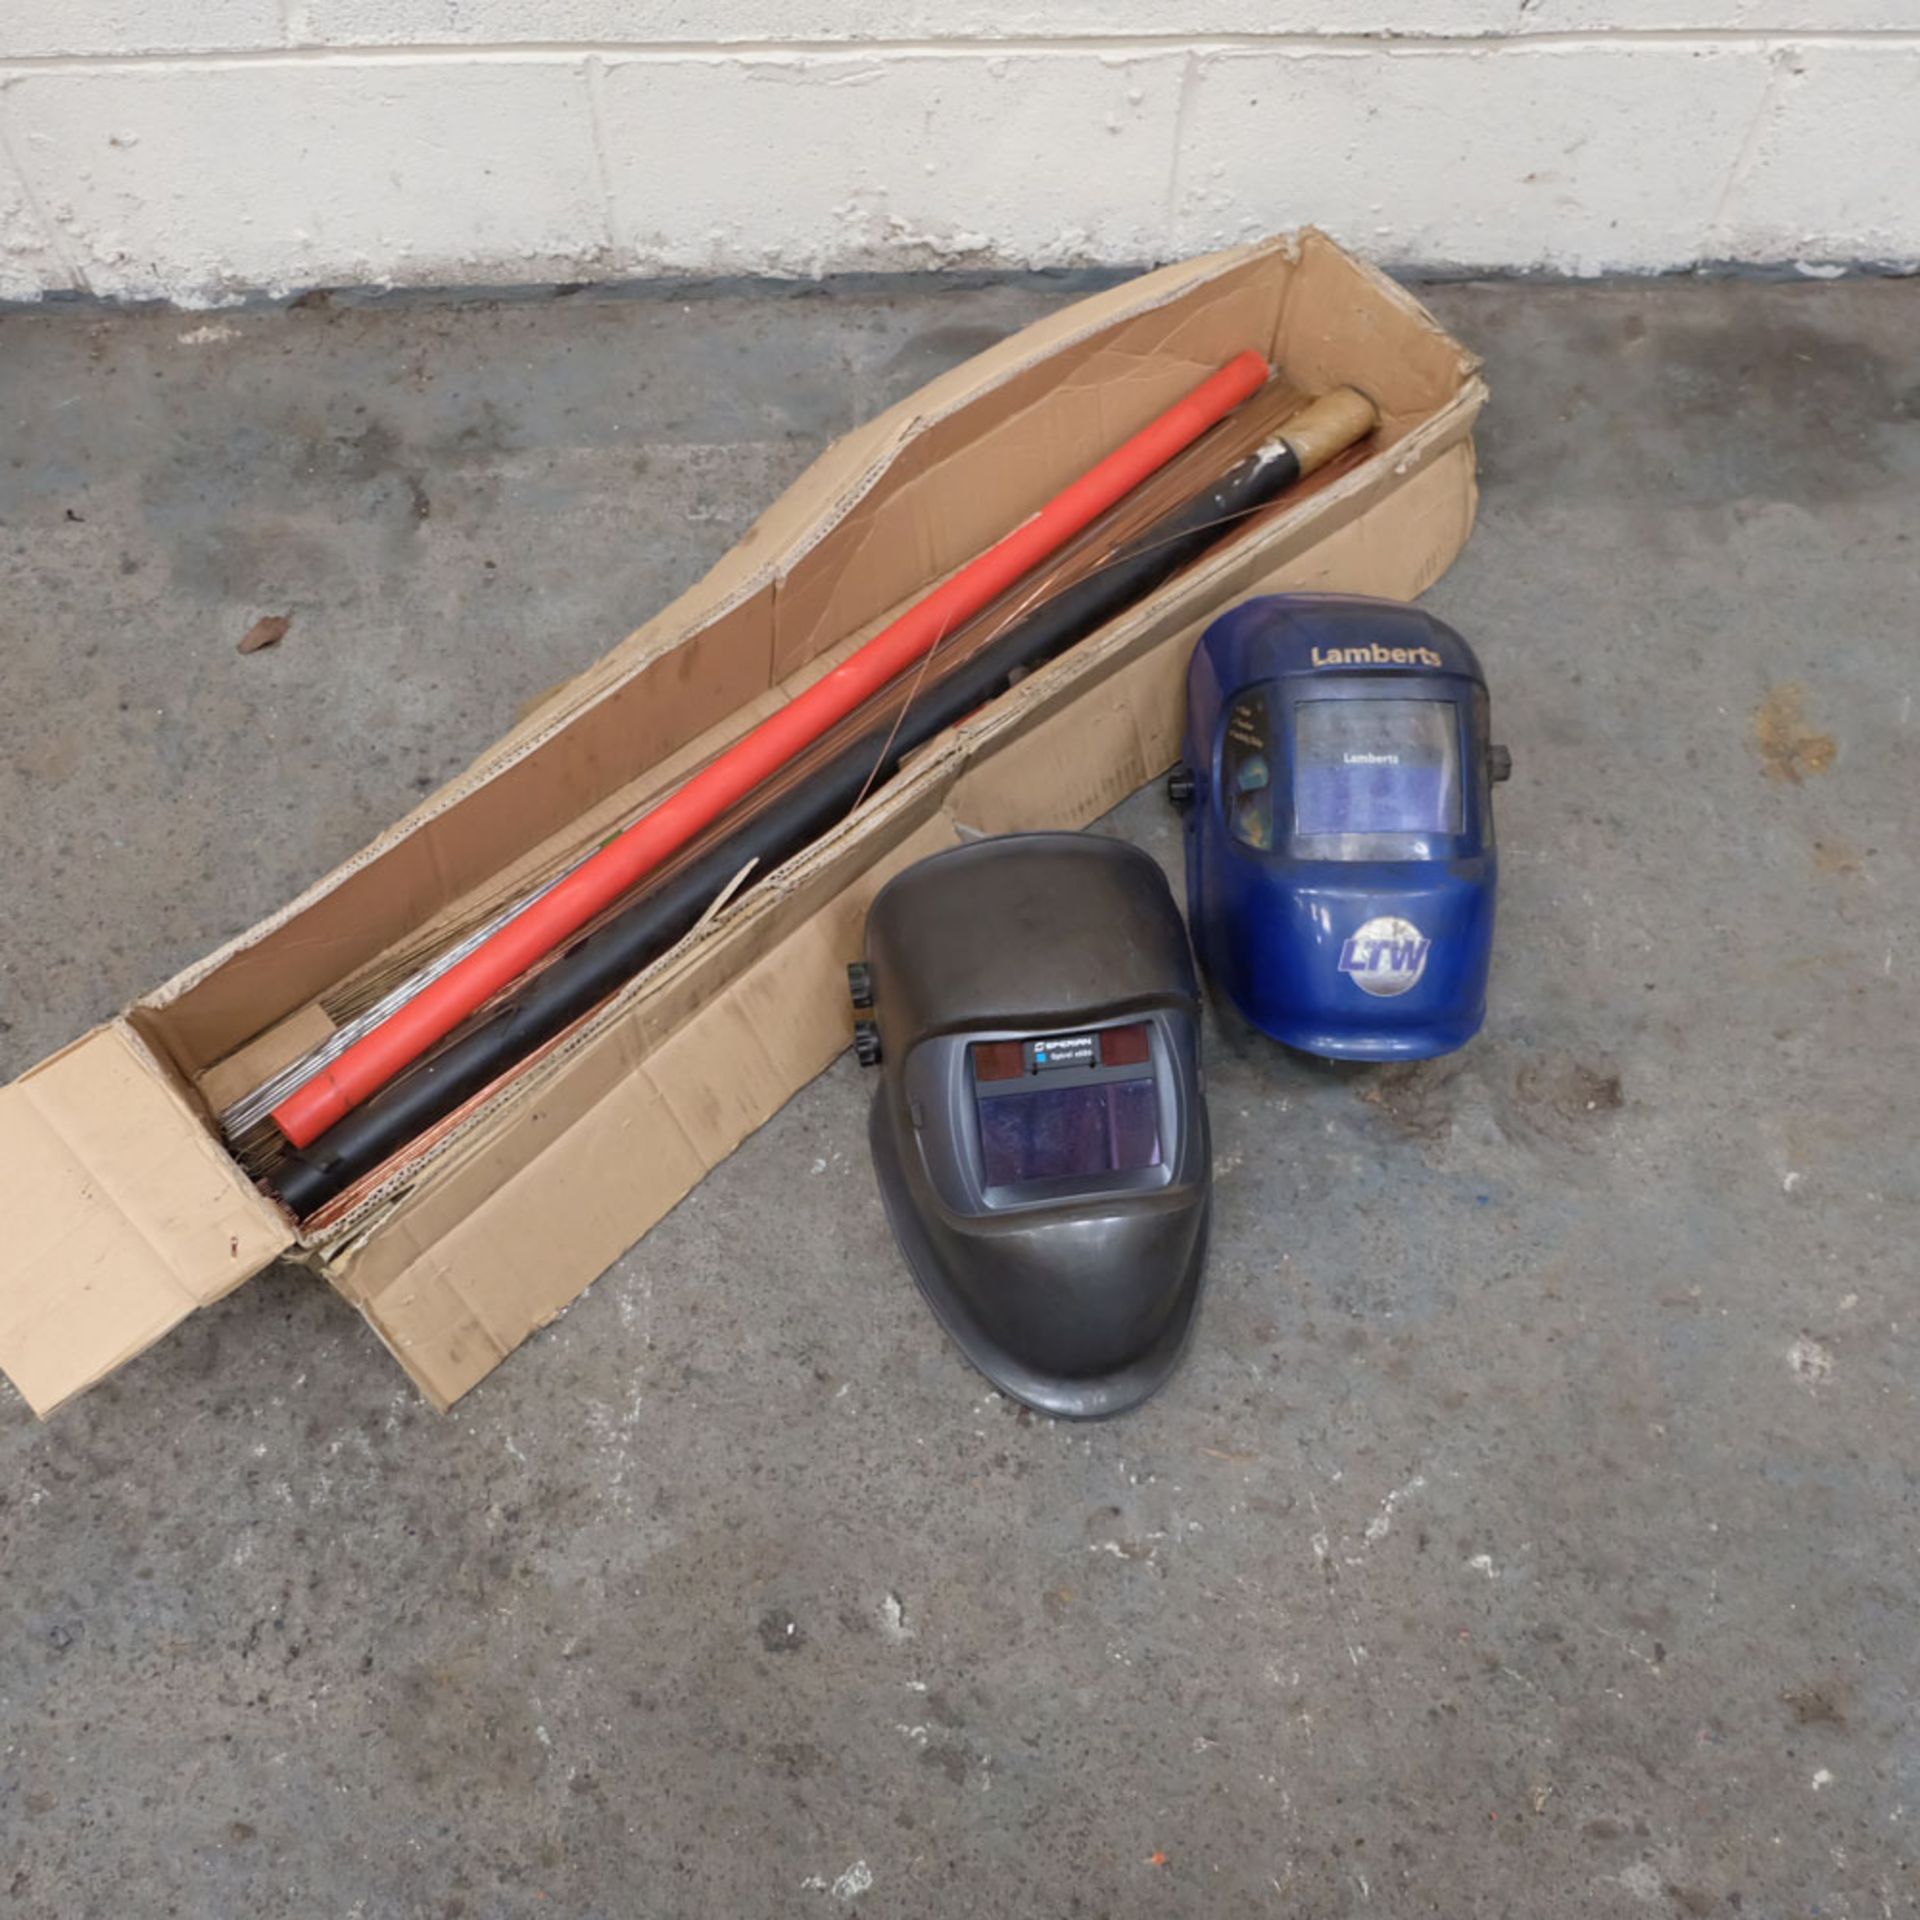 Lot of Welding Rods and Welding Masks.